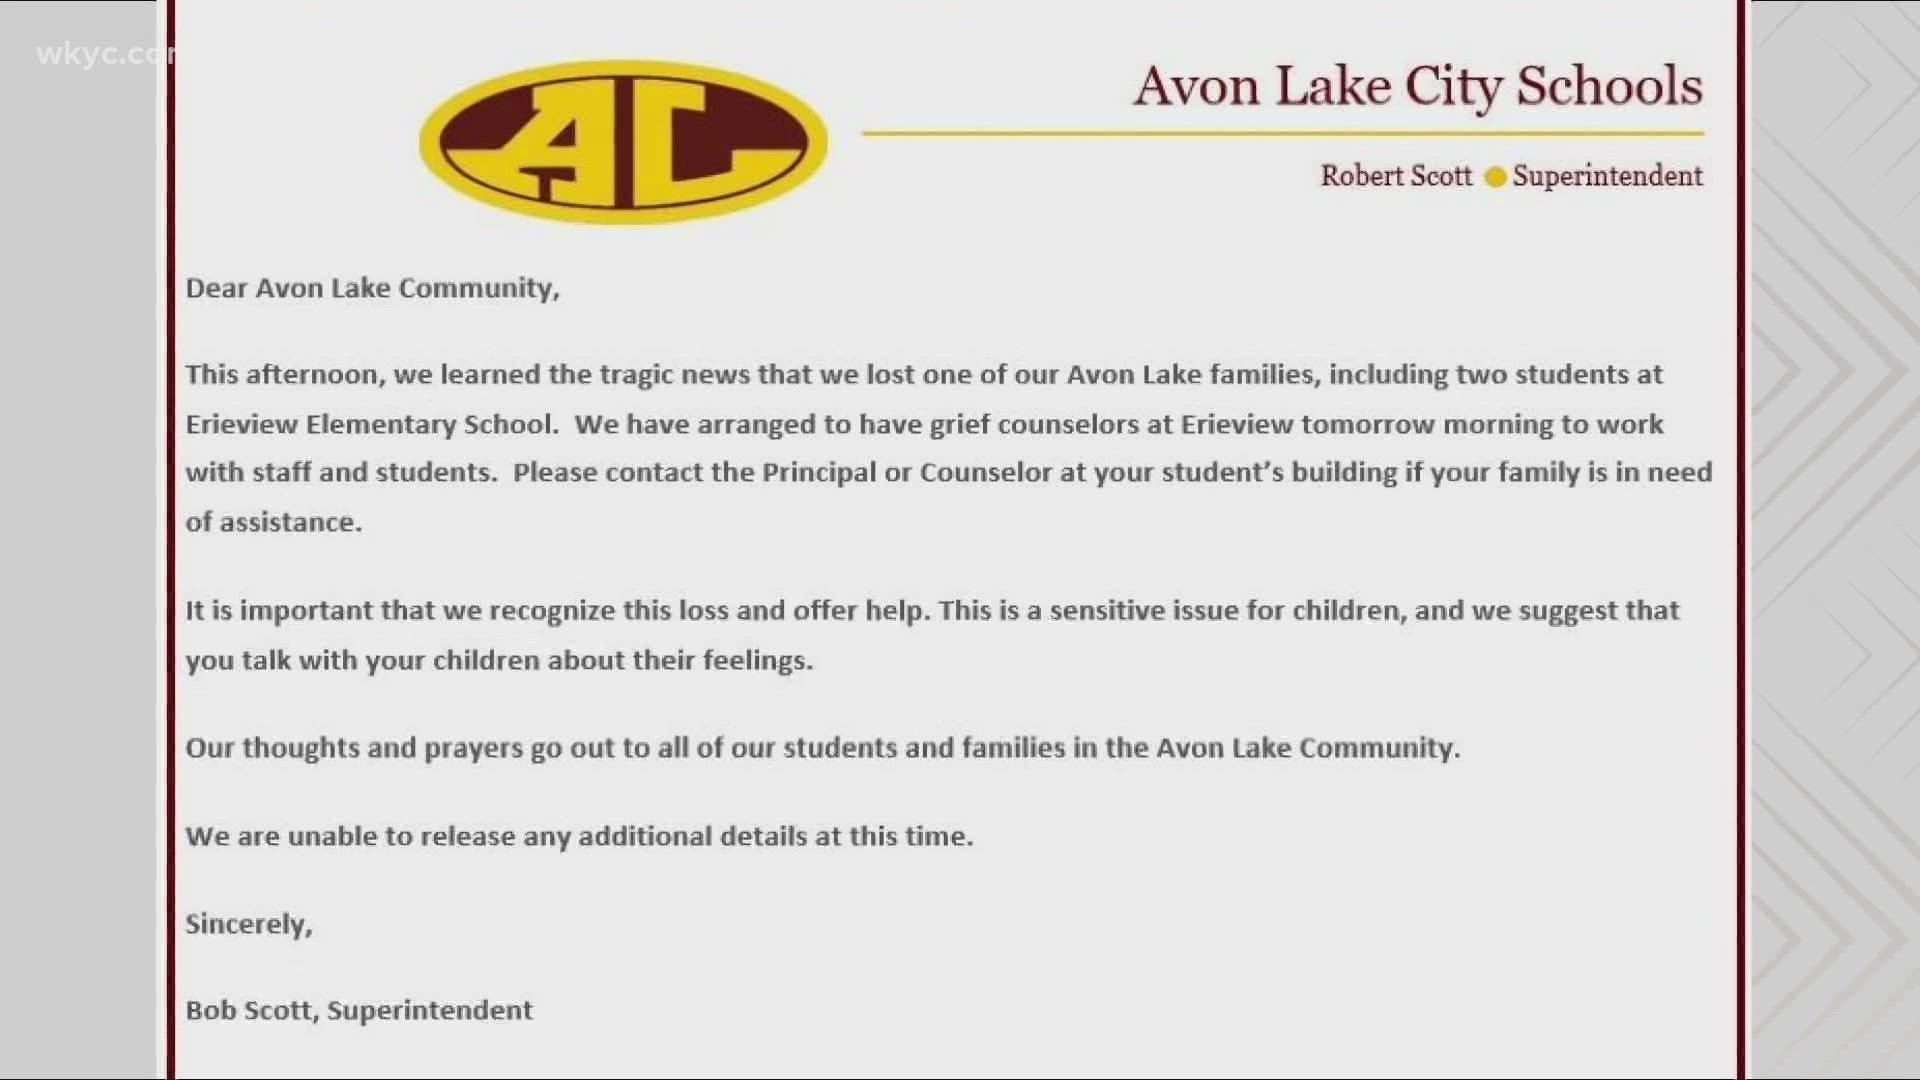 Detectives with the Avon Lake Police Department are investigating after four people were found shot and killed in a home Tuesday afternoon.